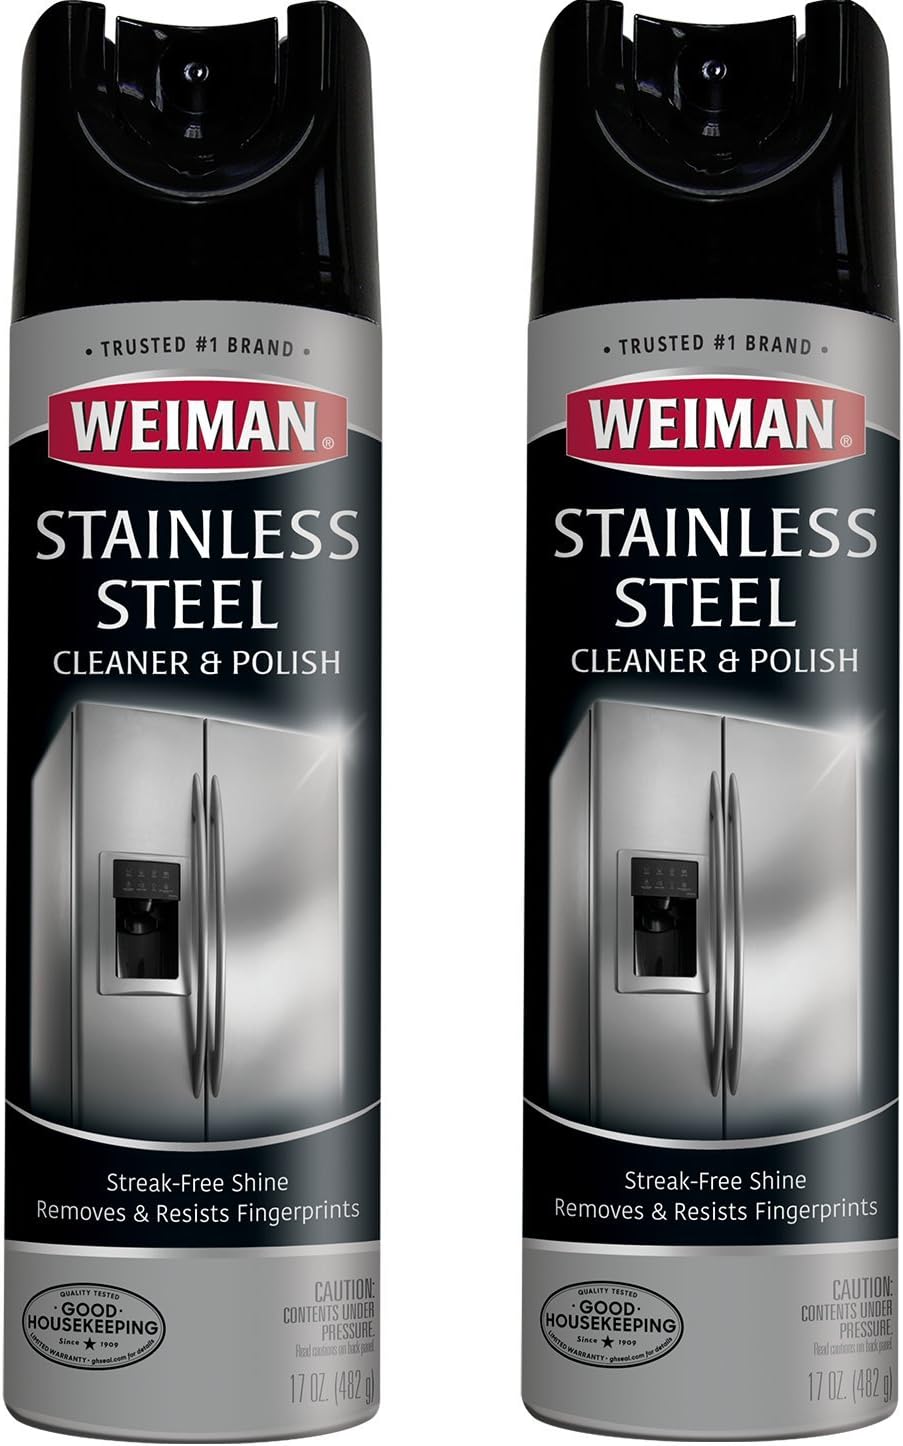 Weiman Stainless Steel Cleaner and Polish - 17 Ounce [...]